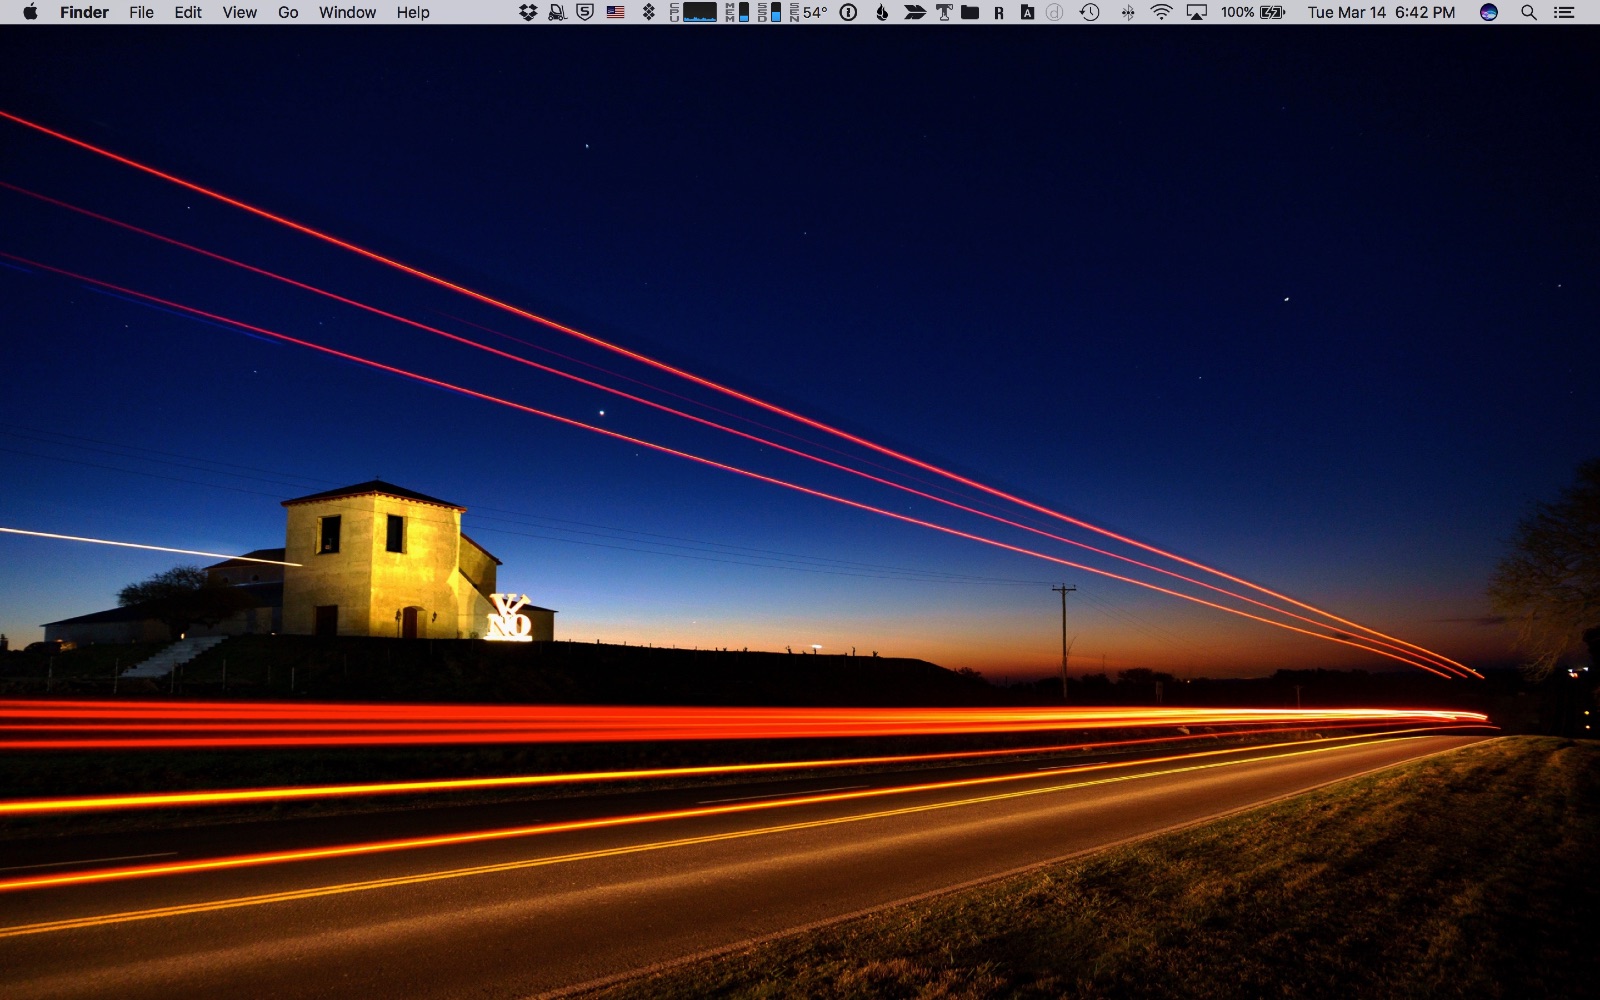 How to Customize the Desktop Background on Your Mac